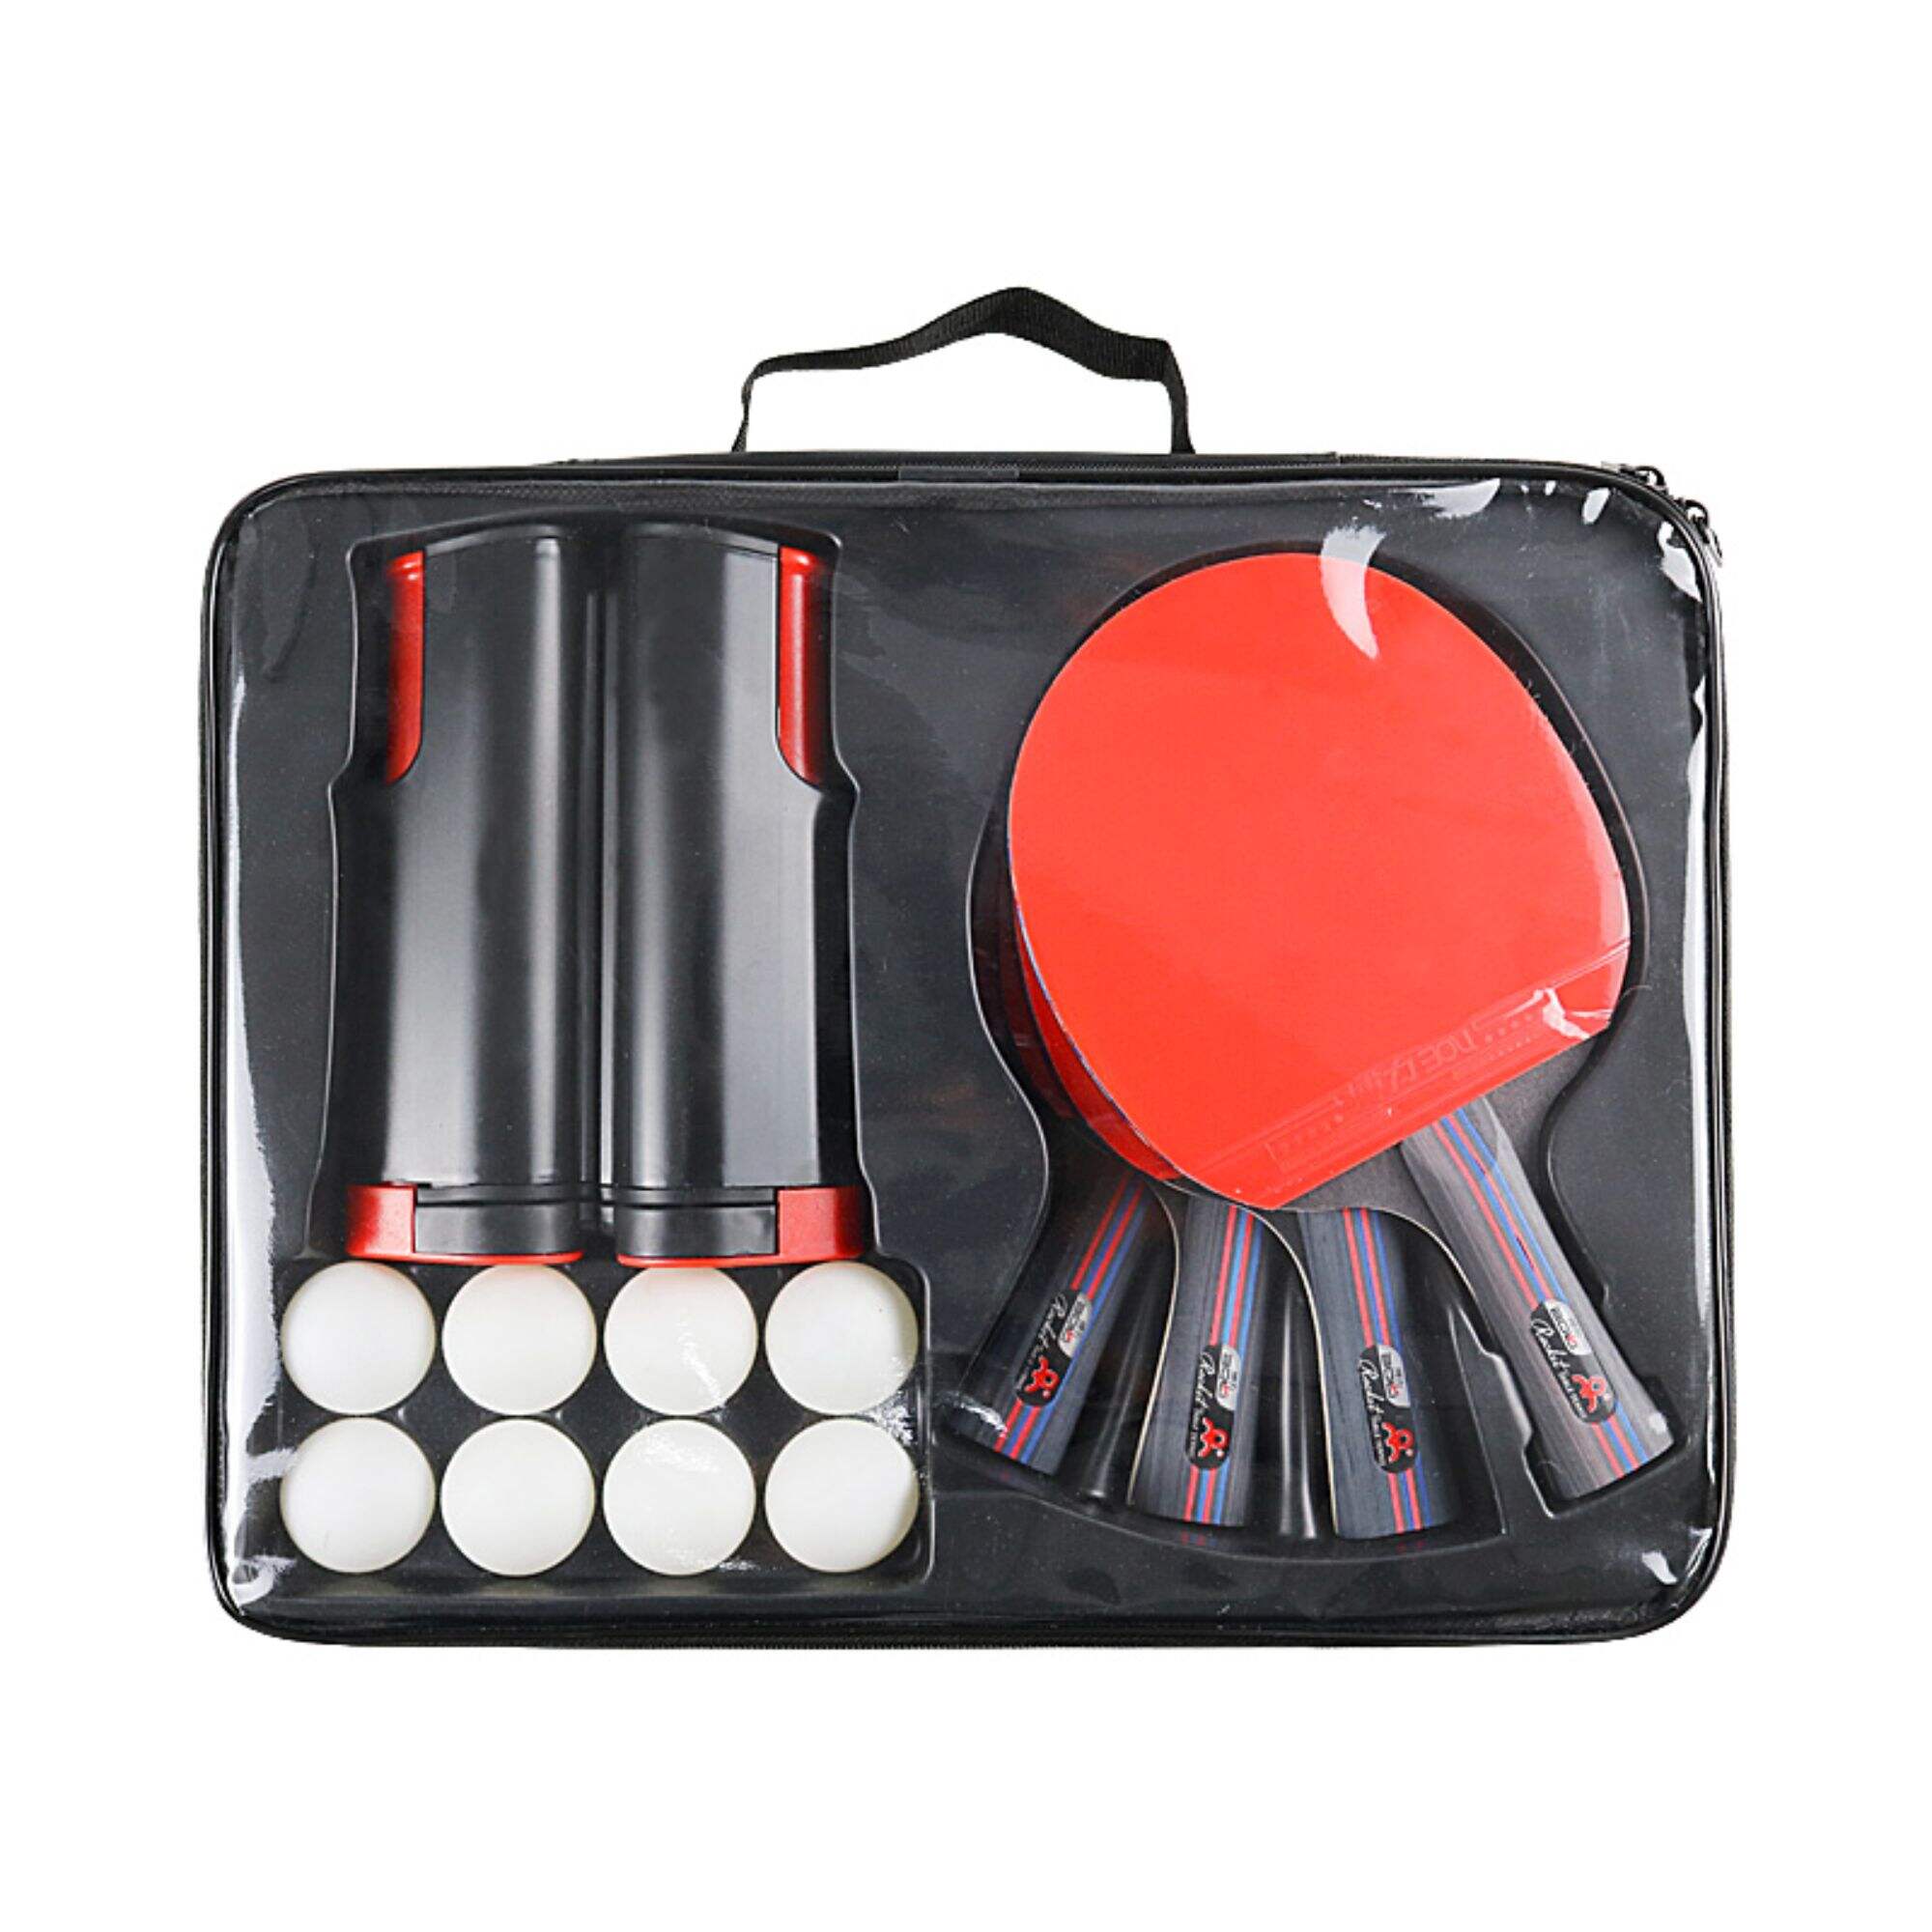 T01 Boli Long Handle Table Tennis Racket Set With 8 Balls And A Net